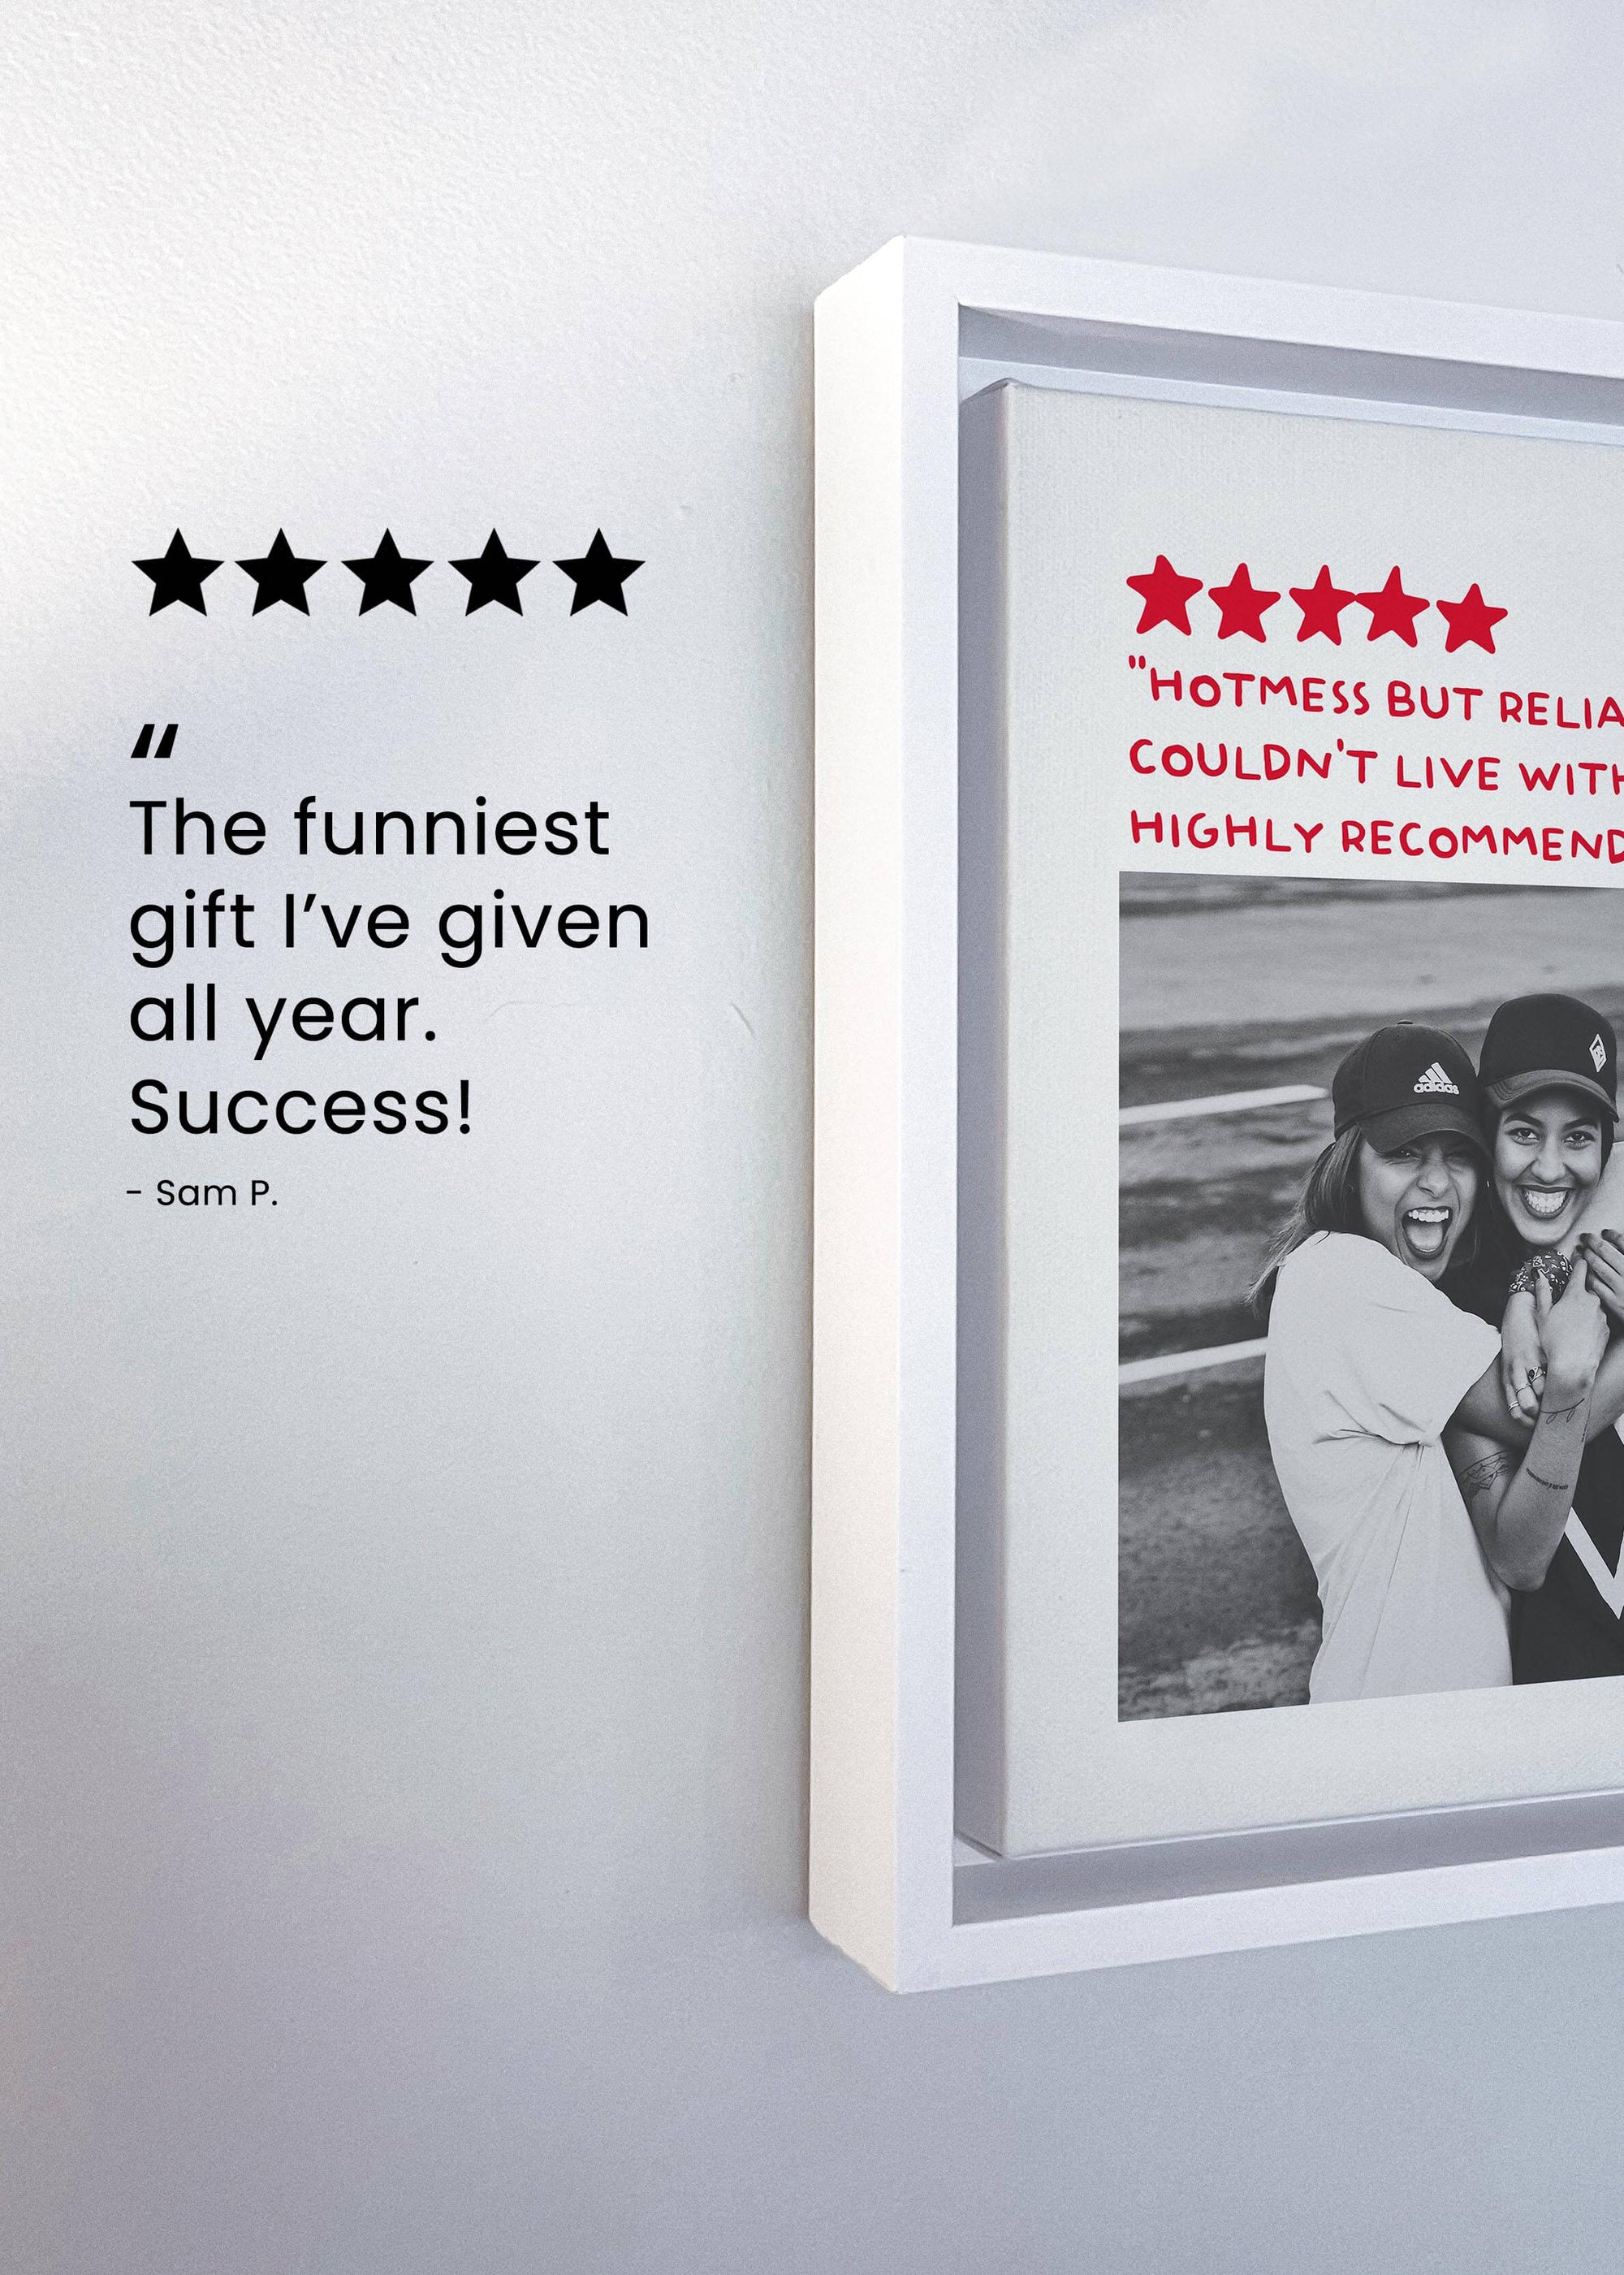 The 5 Star Review Canvas